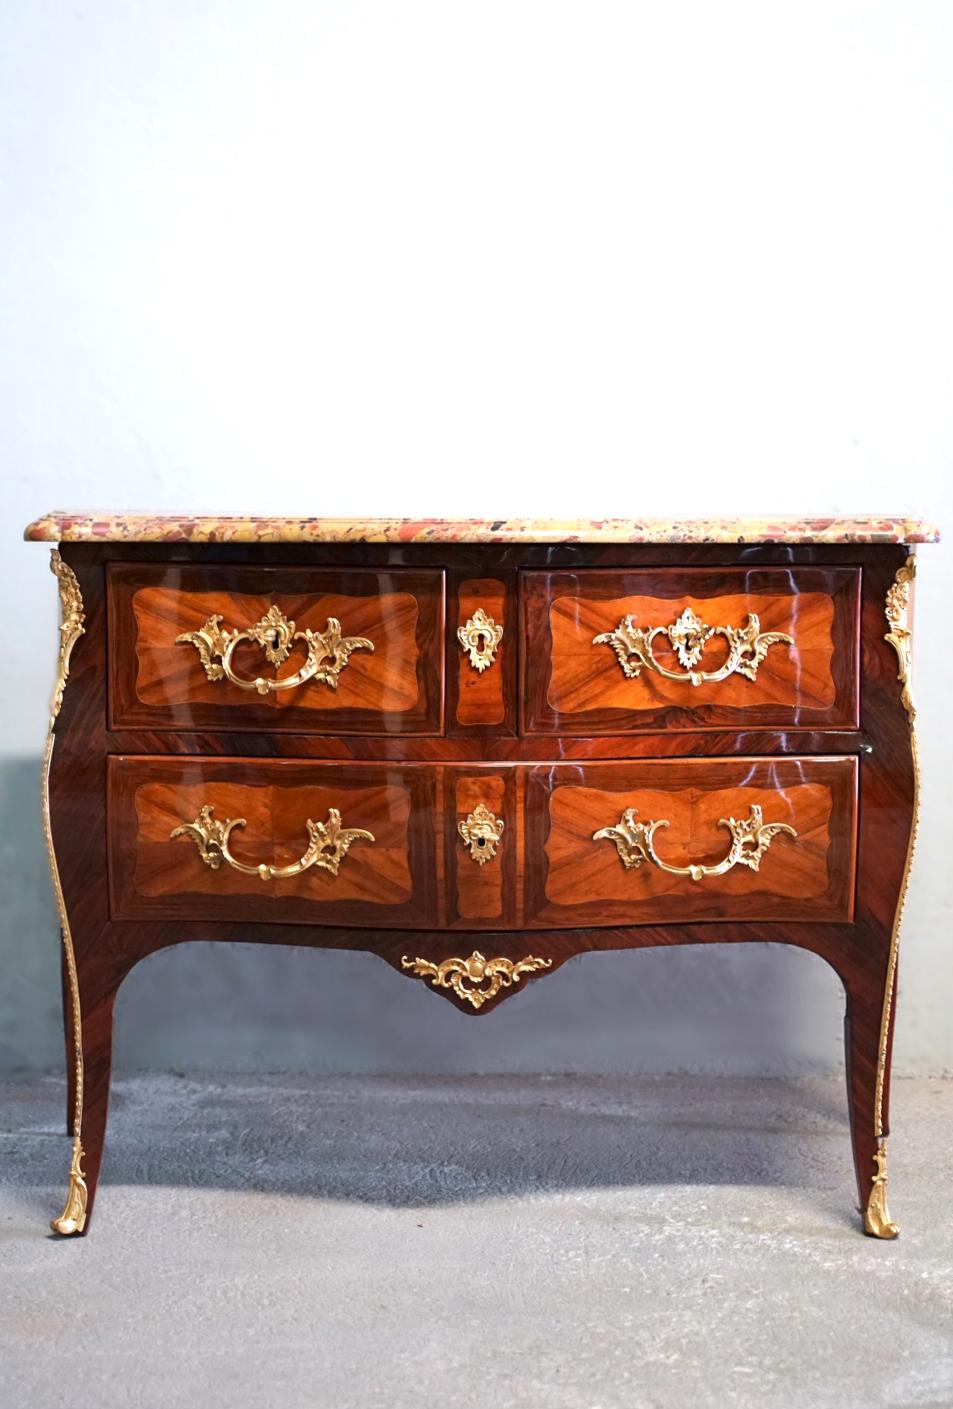 Malle Louis Noël Stamped Wooden Chest Of Drawers, Paris 18th Century For Sale 7